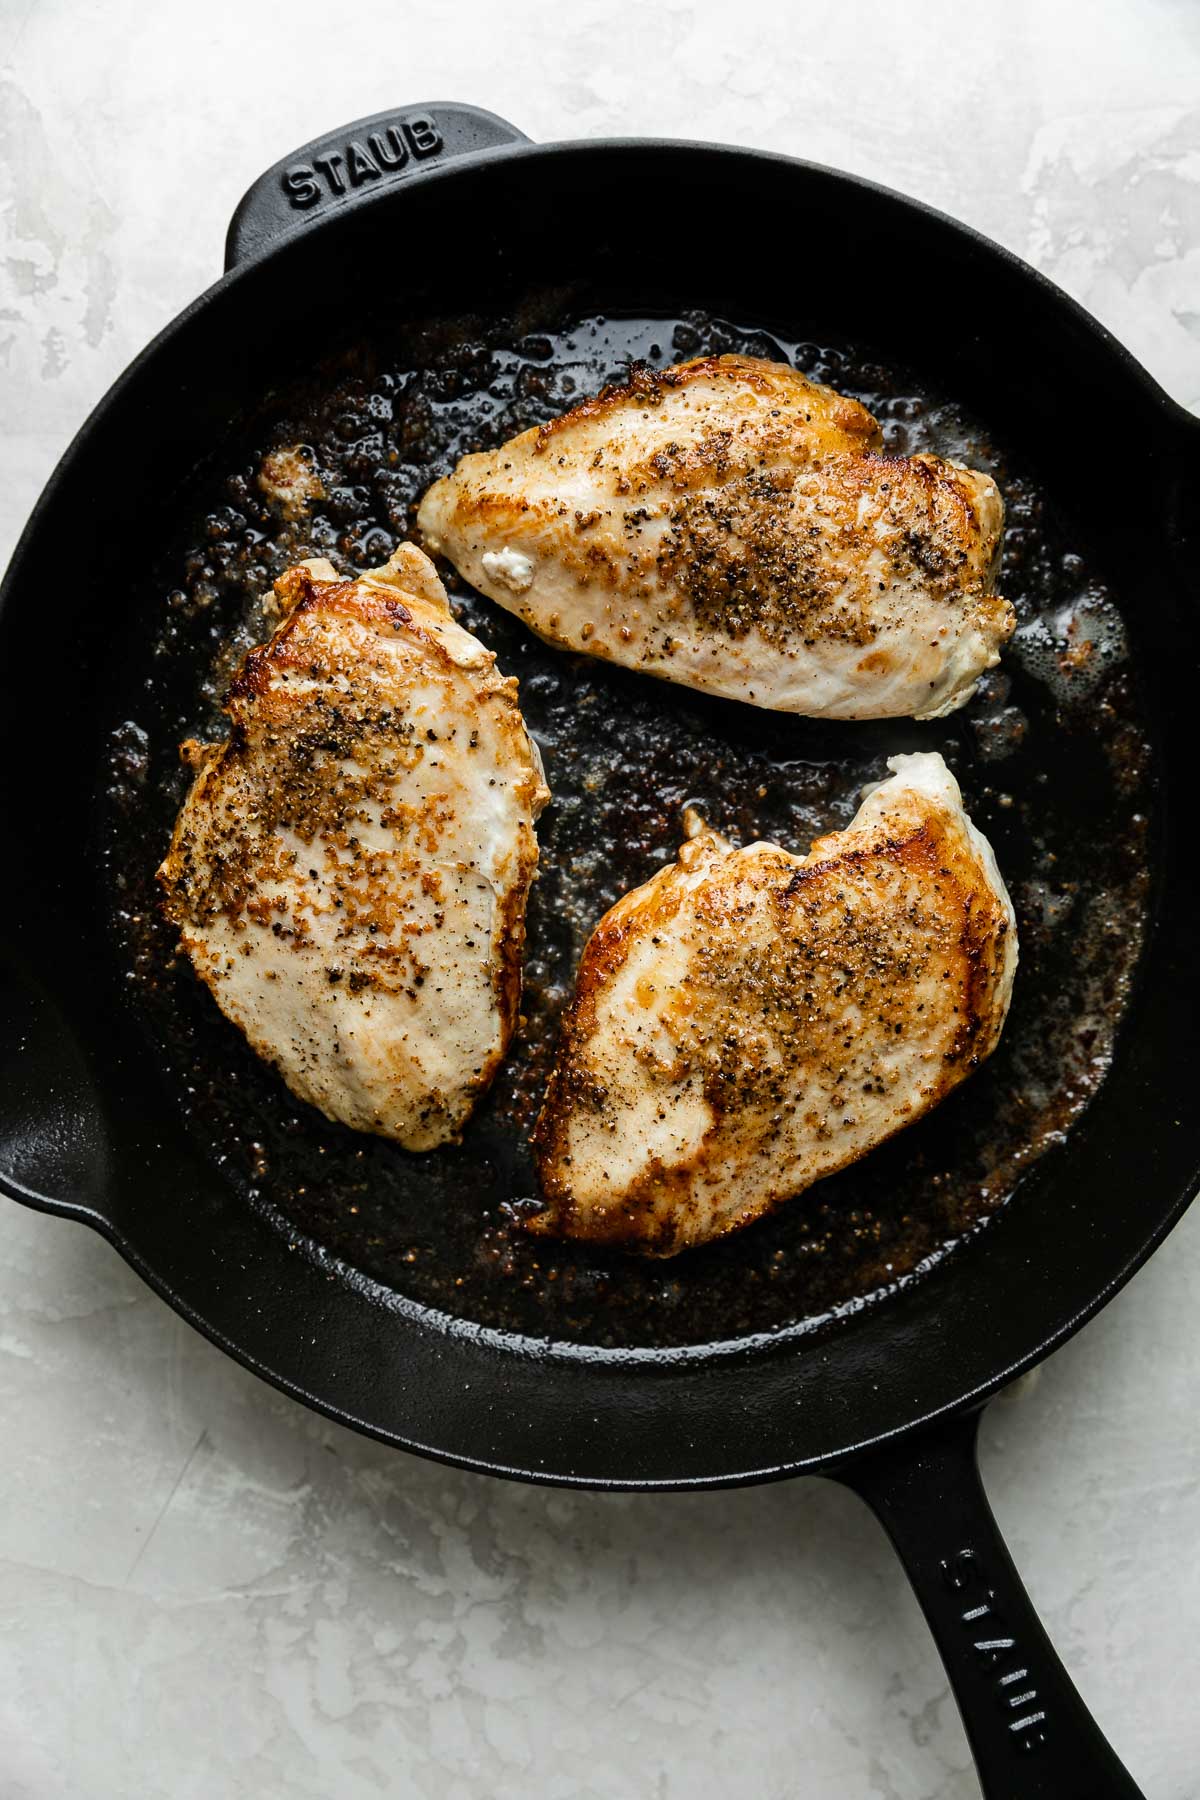 Three browned chicken breasts, seasoned with salt and pepper, in a Staub black cast iron skillet resting atop a creamy white textured surface.